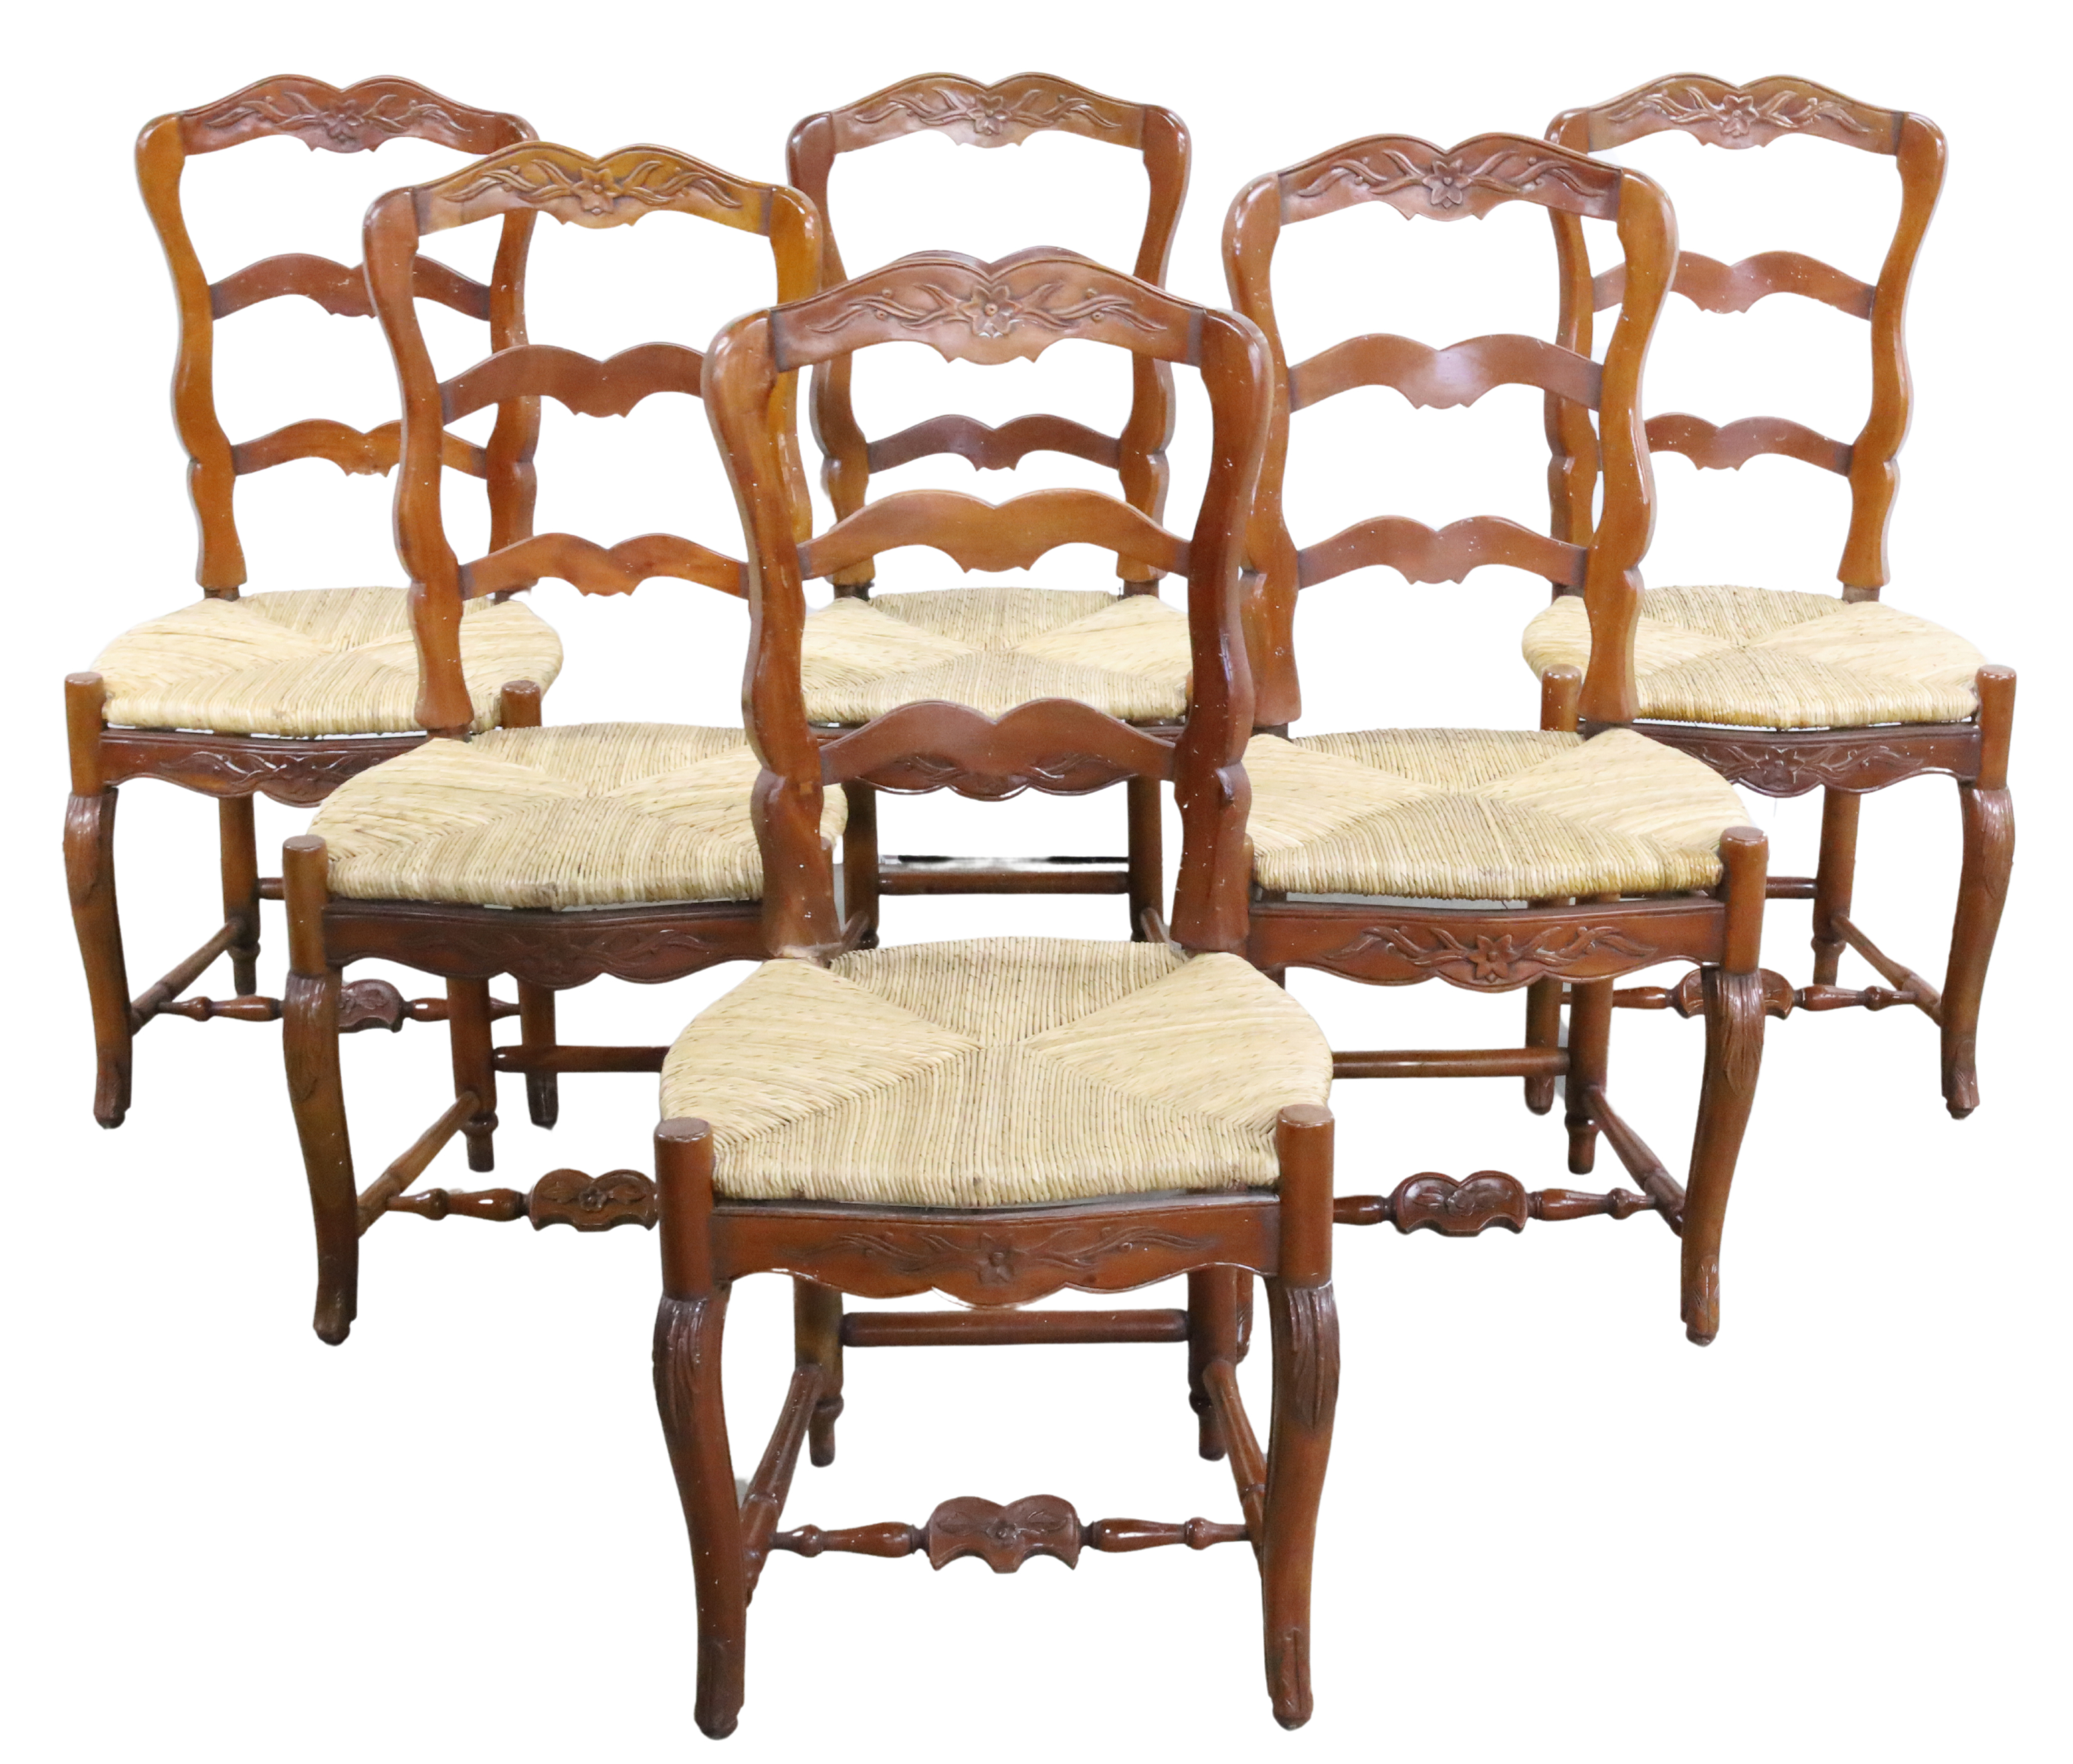 6 FRENCH PROVINCIAL RUSH SEAT CHAIRS 3b3bce